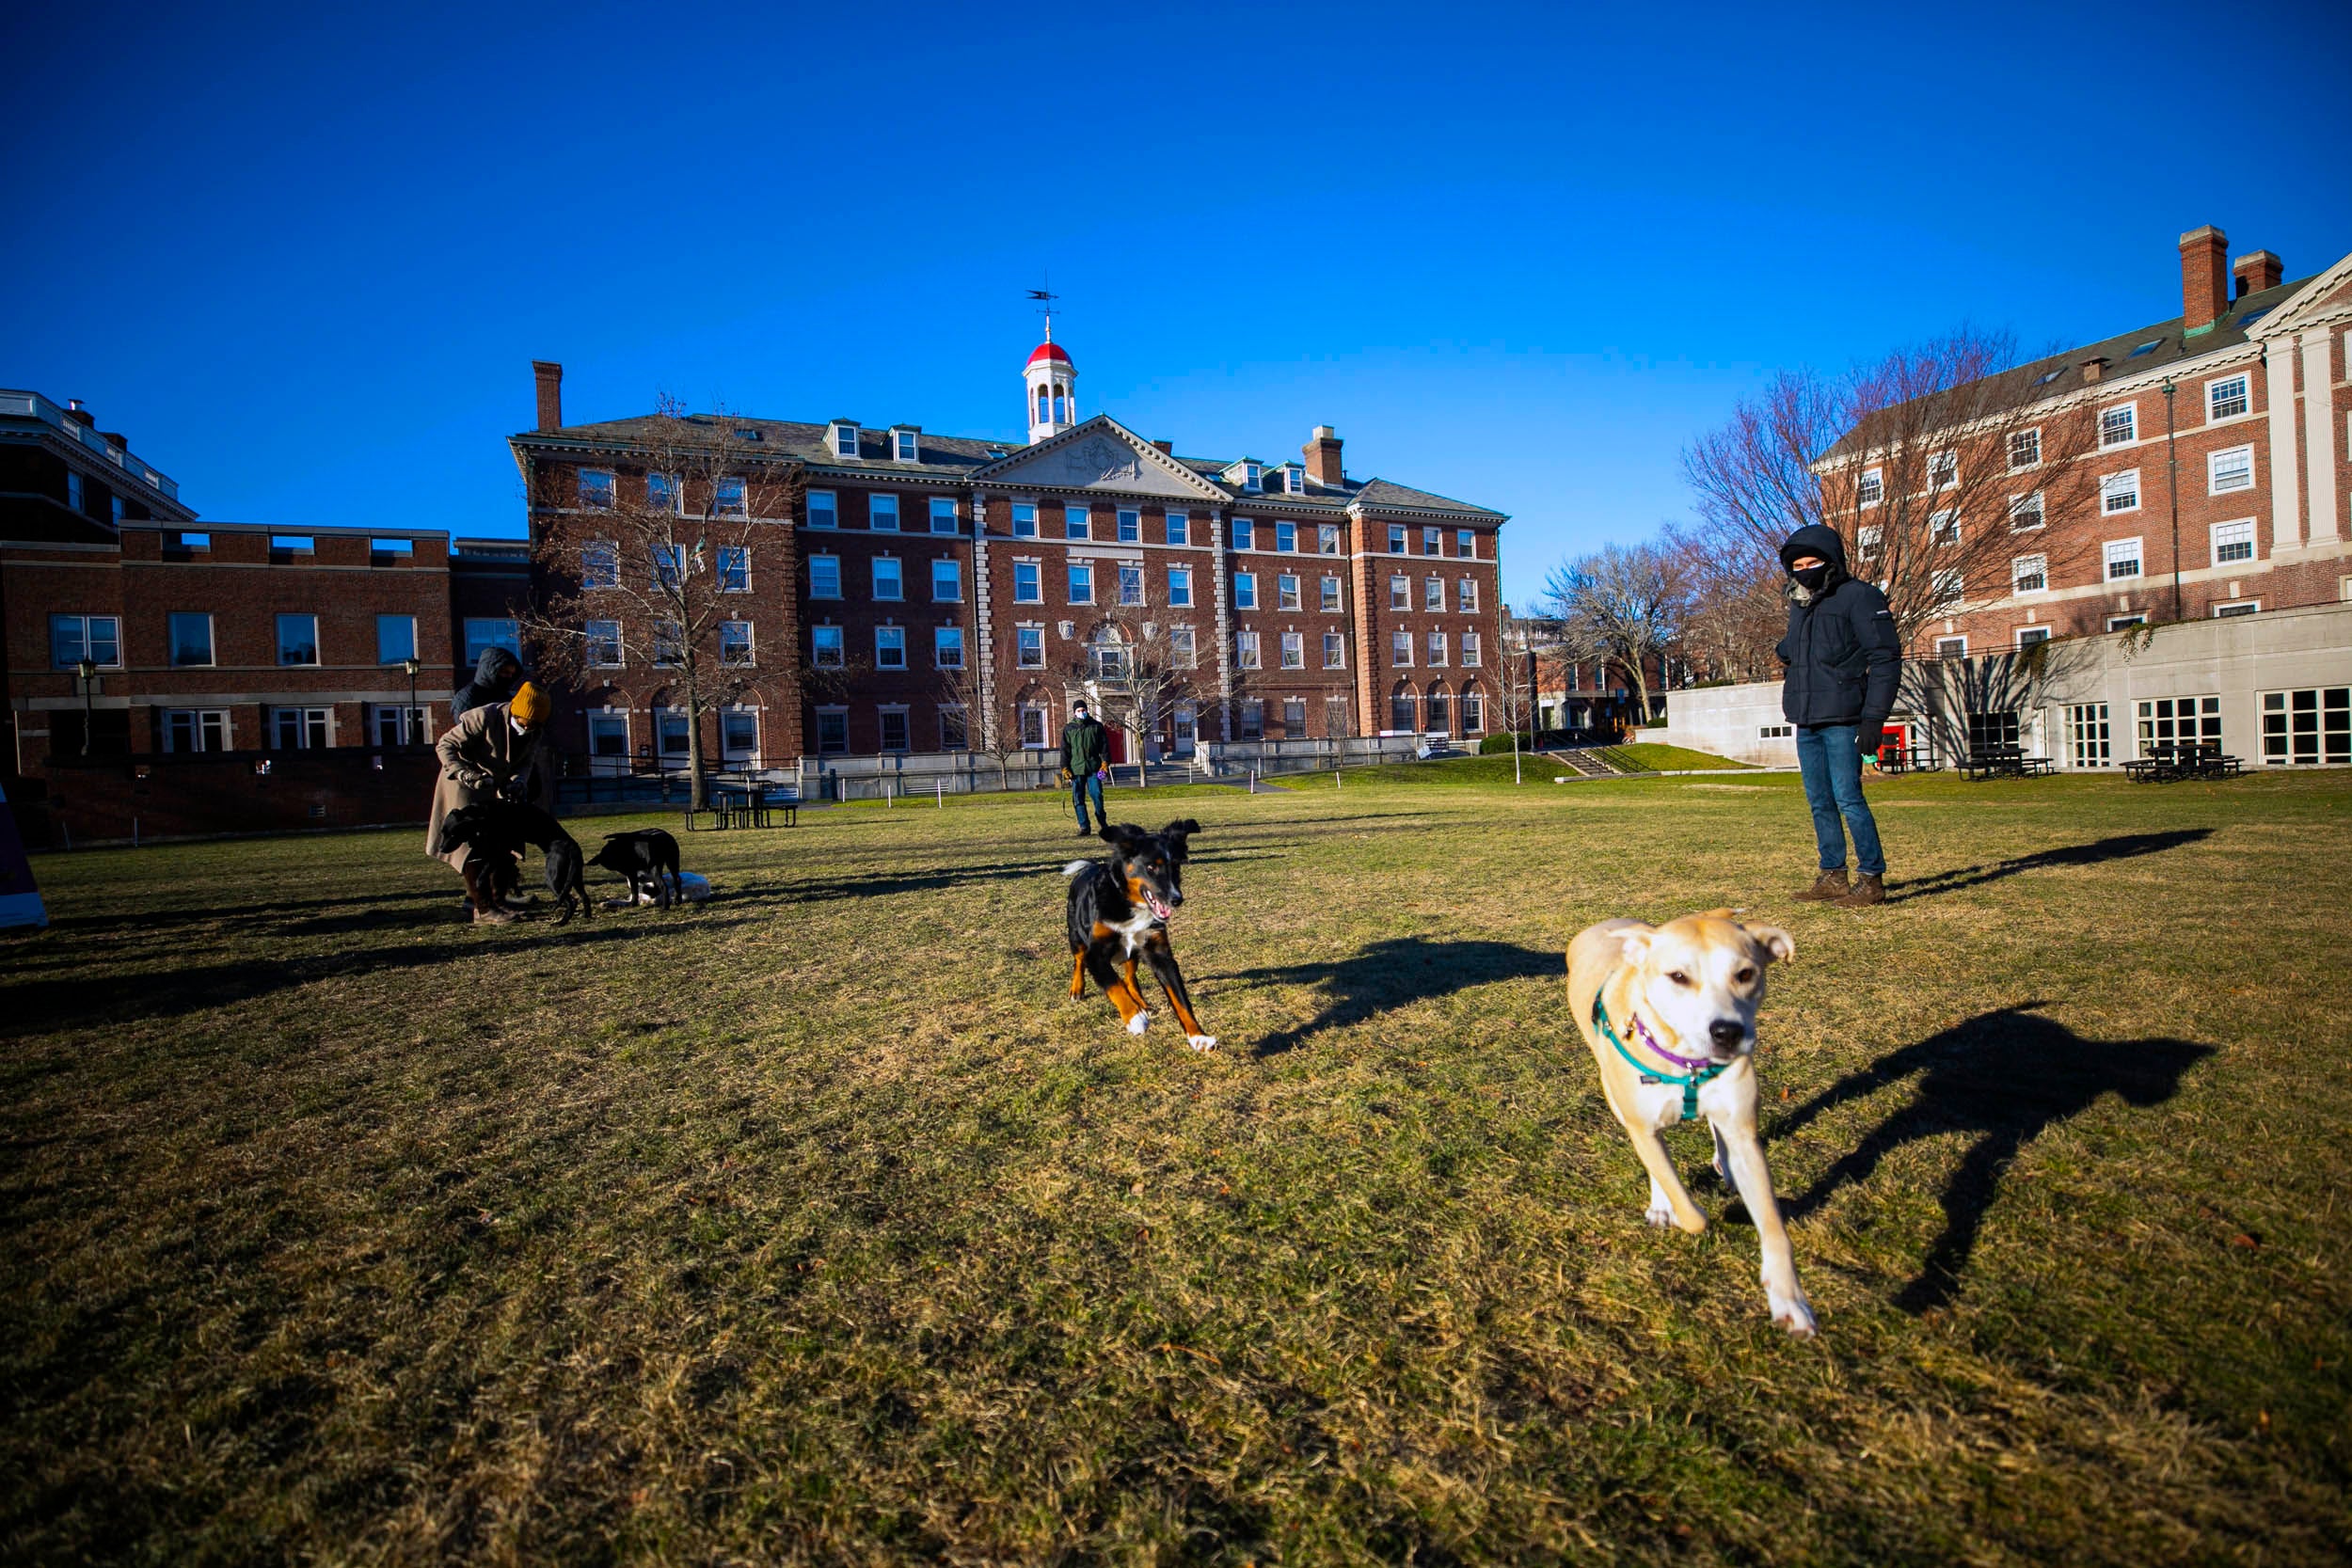 A puppy play group gathers in open space facing Cabot House.